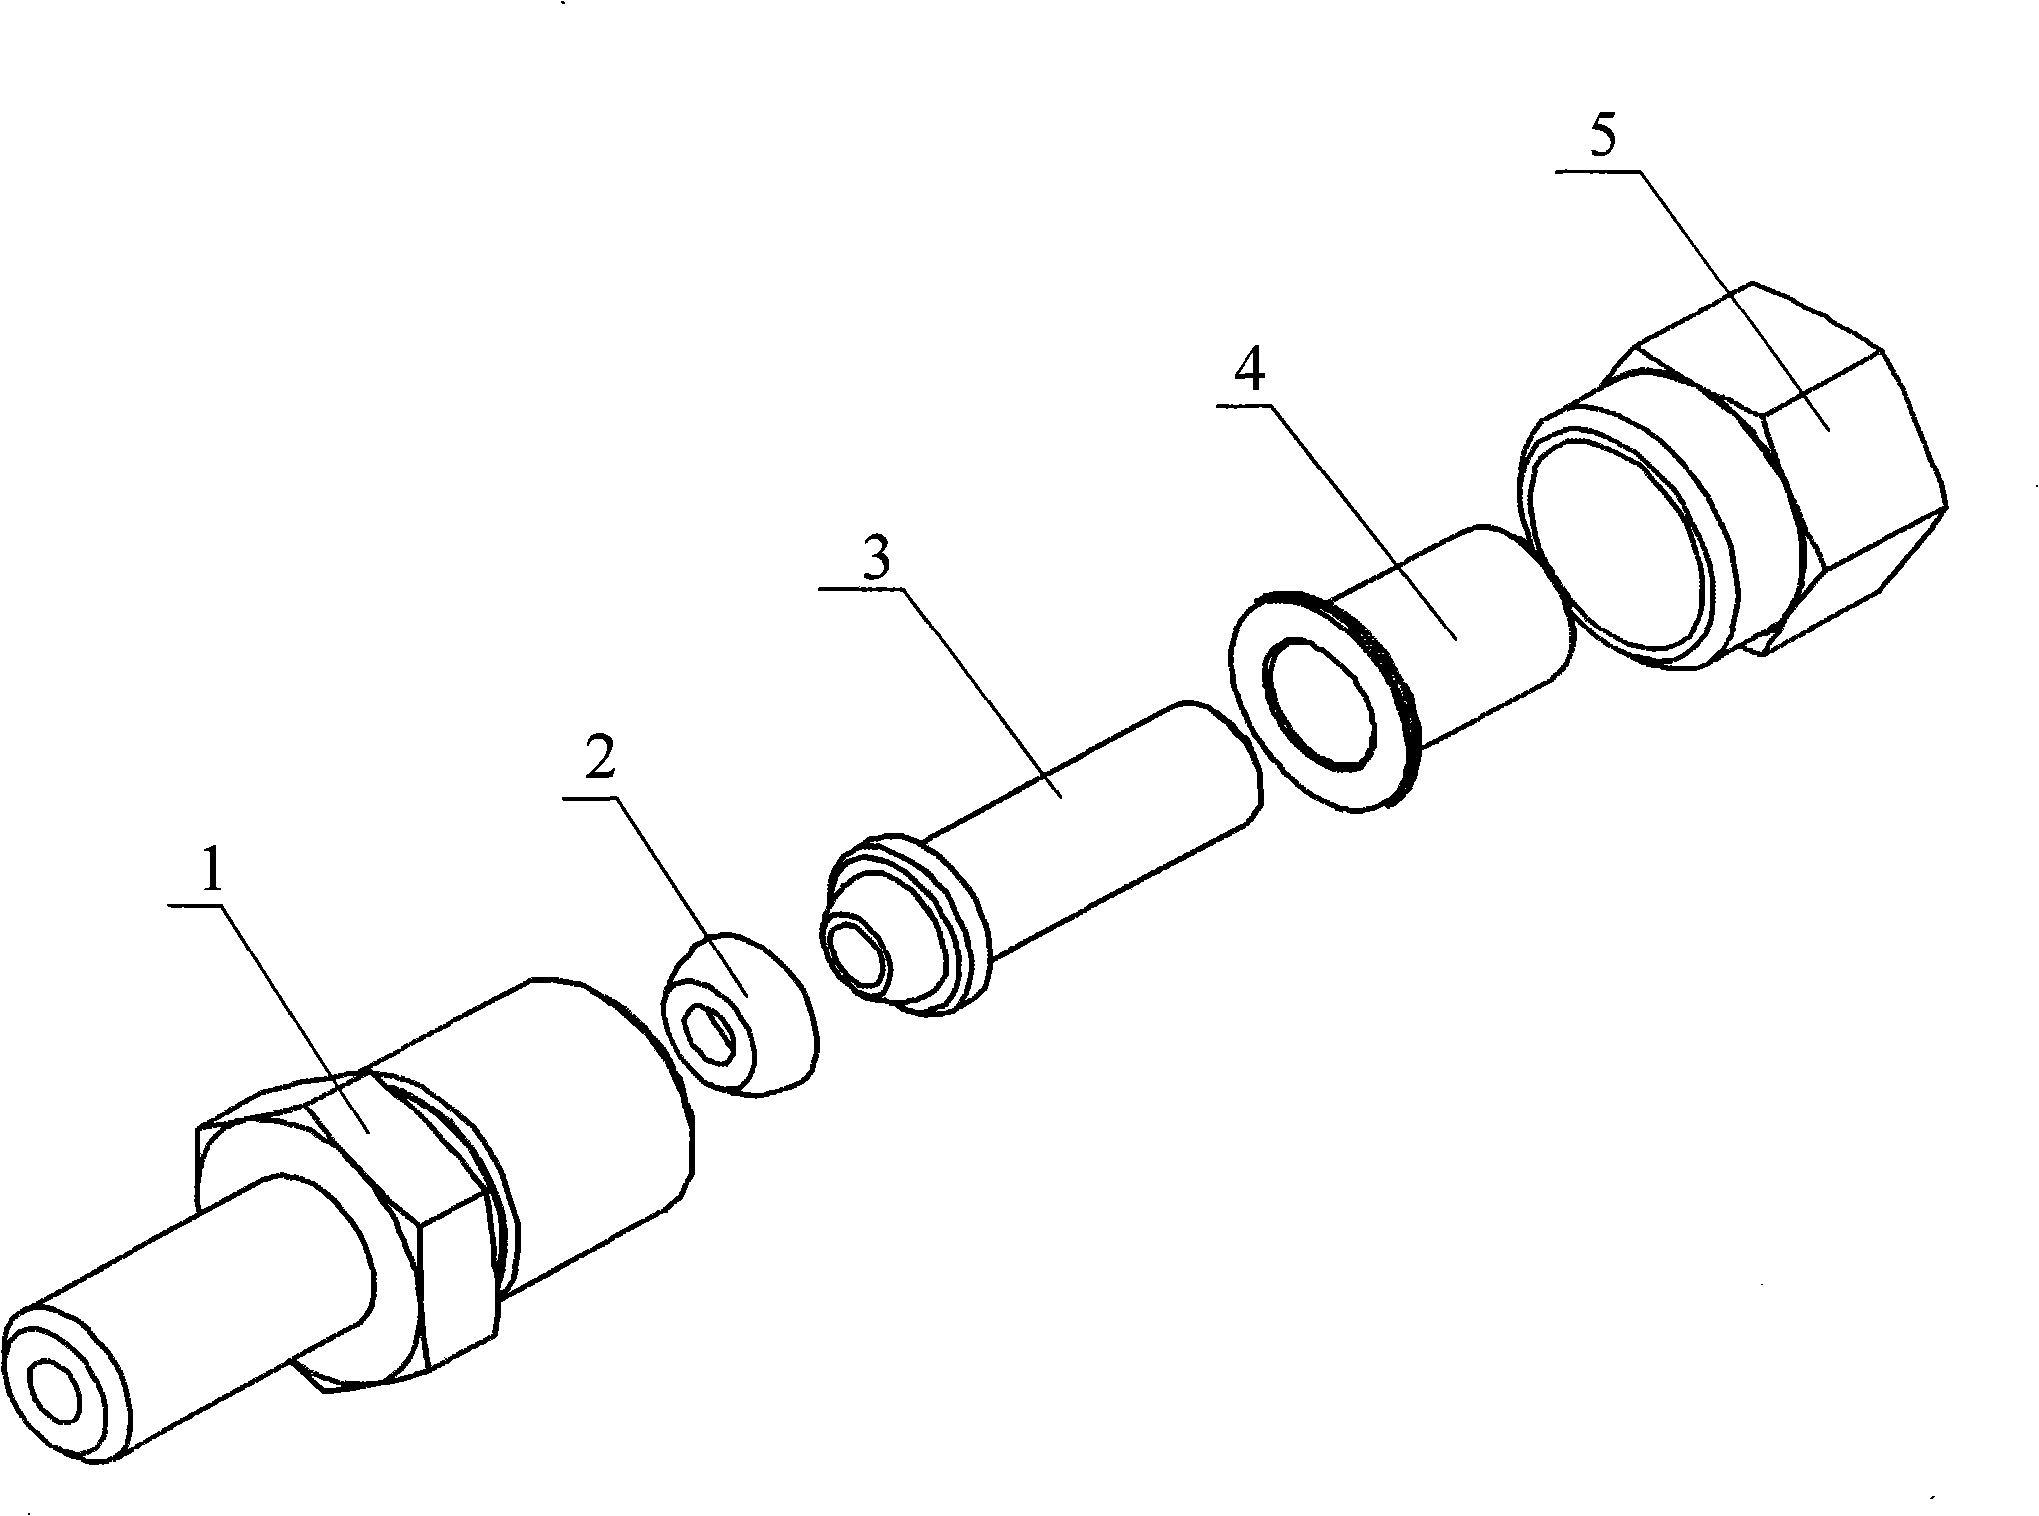 Connecting mechanism of sealed insulation pipelines